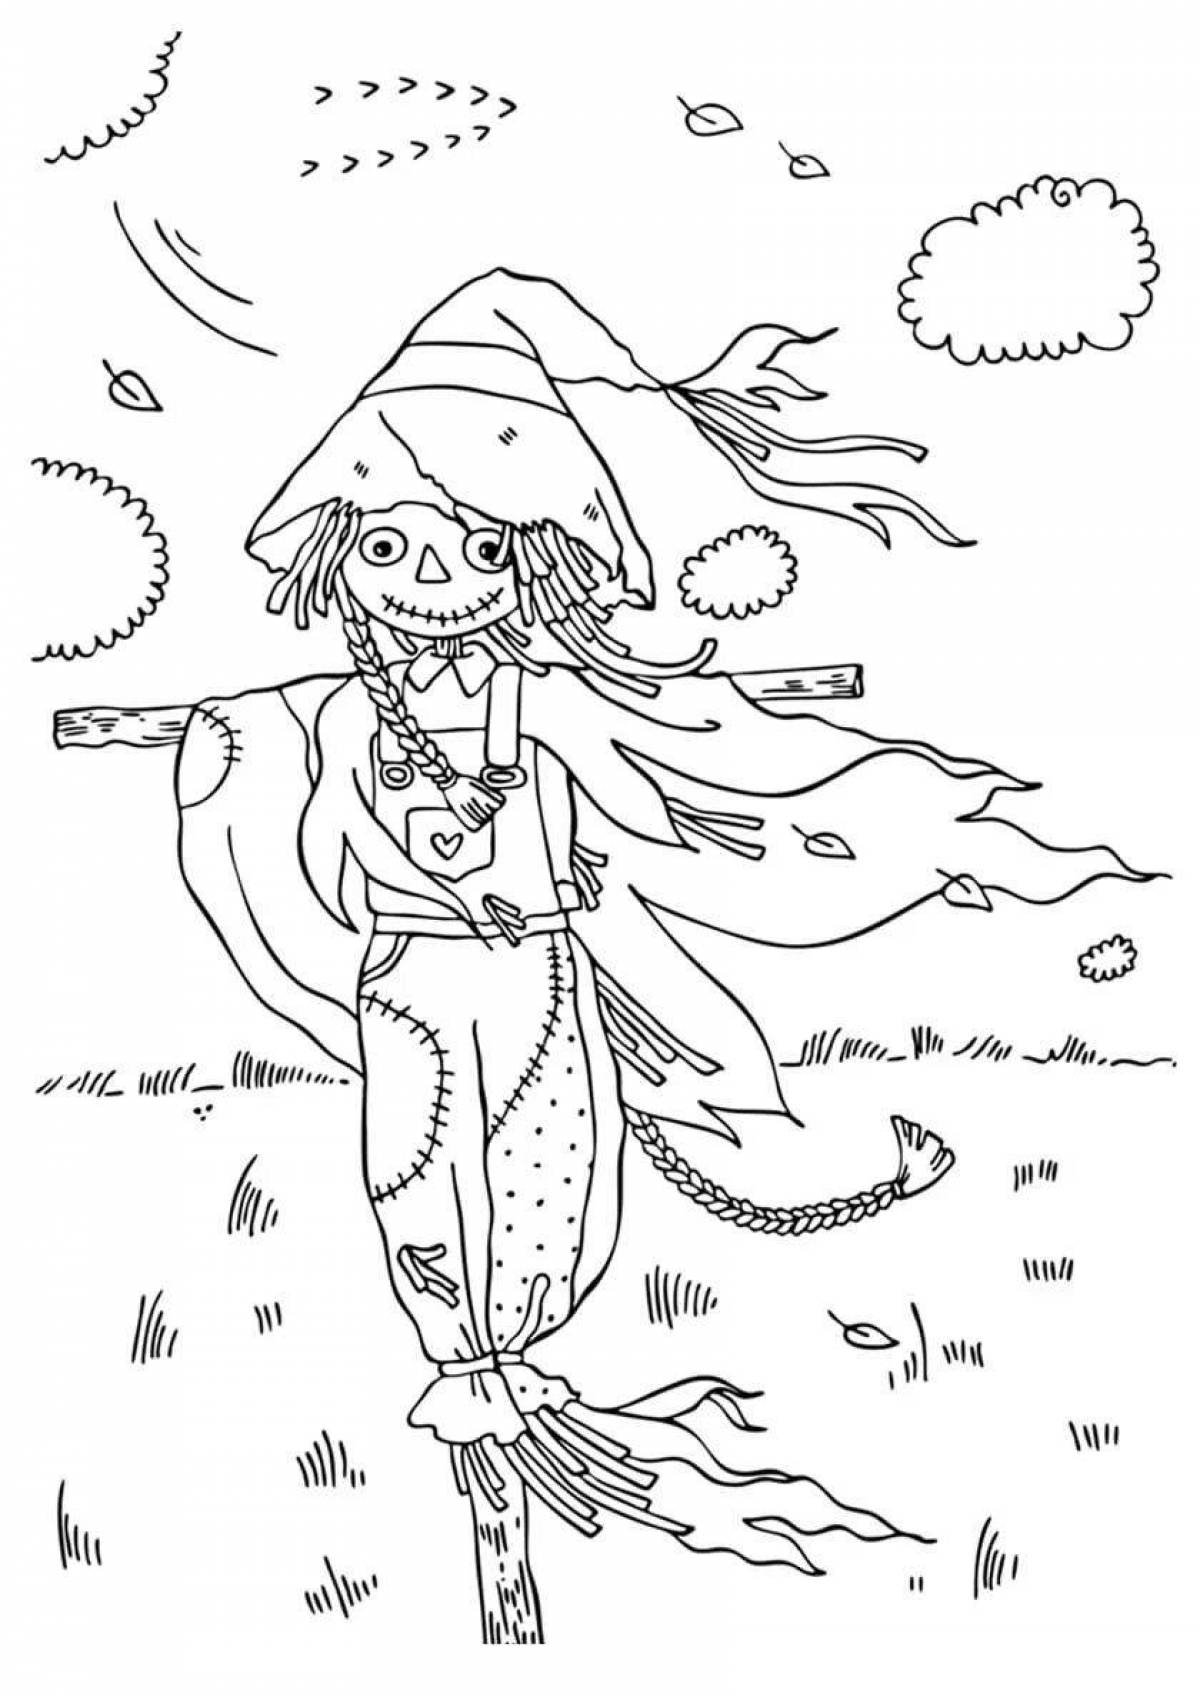 Rampant Shrovetide Scarecrow coloring page